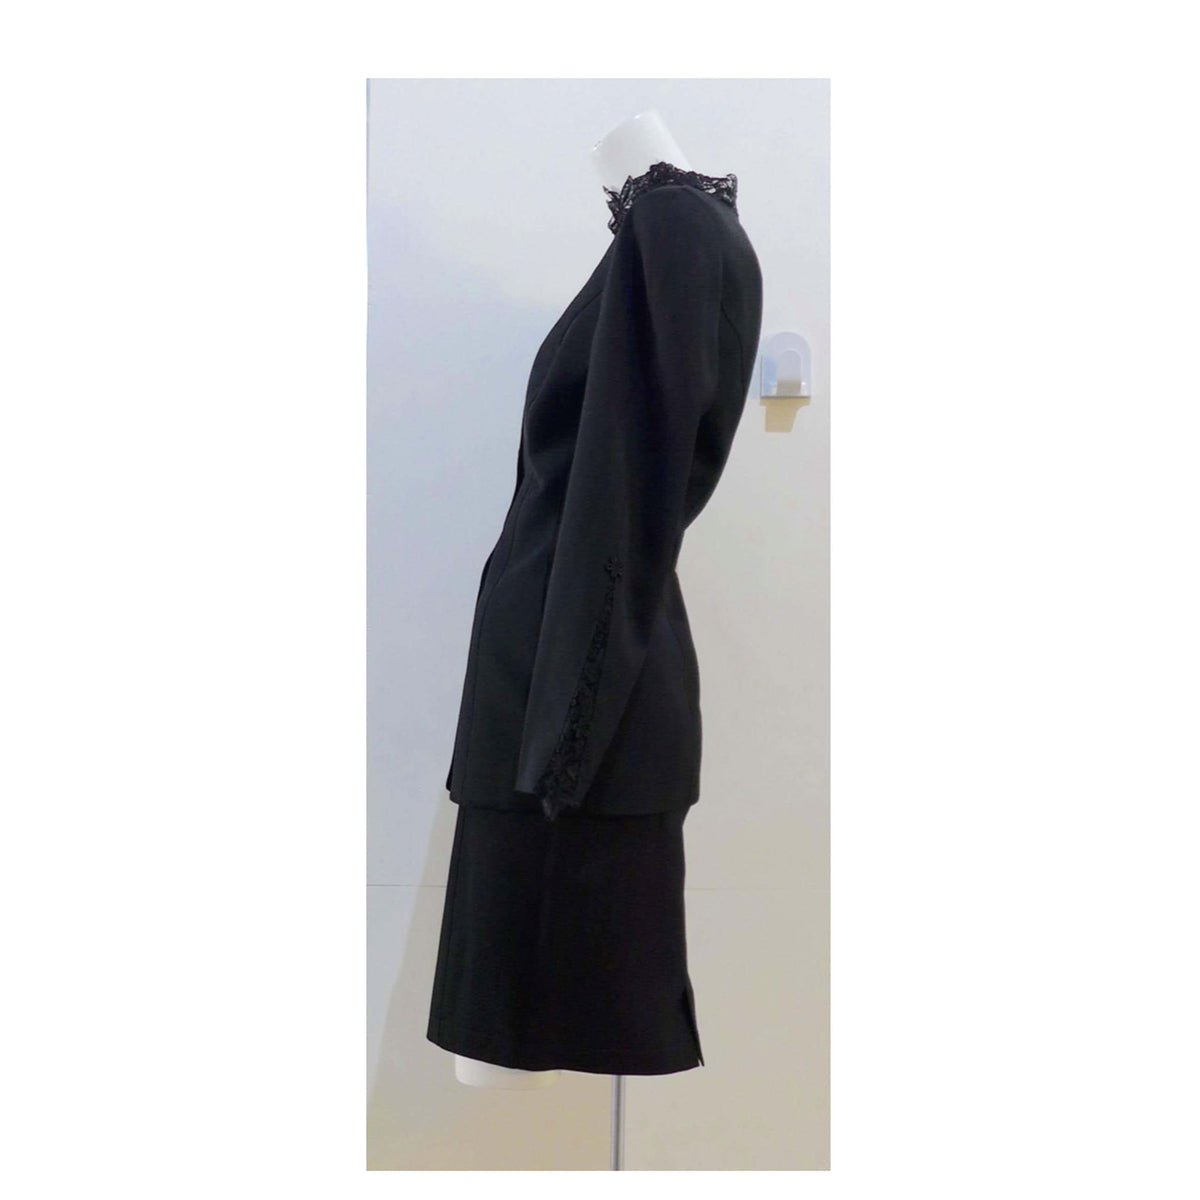 Thierry Mugler Black Skirt Suit with Lace Details Size 40